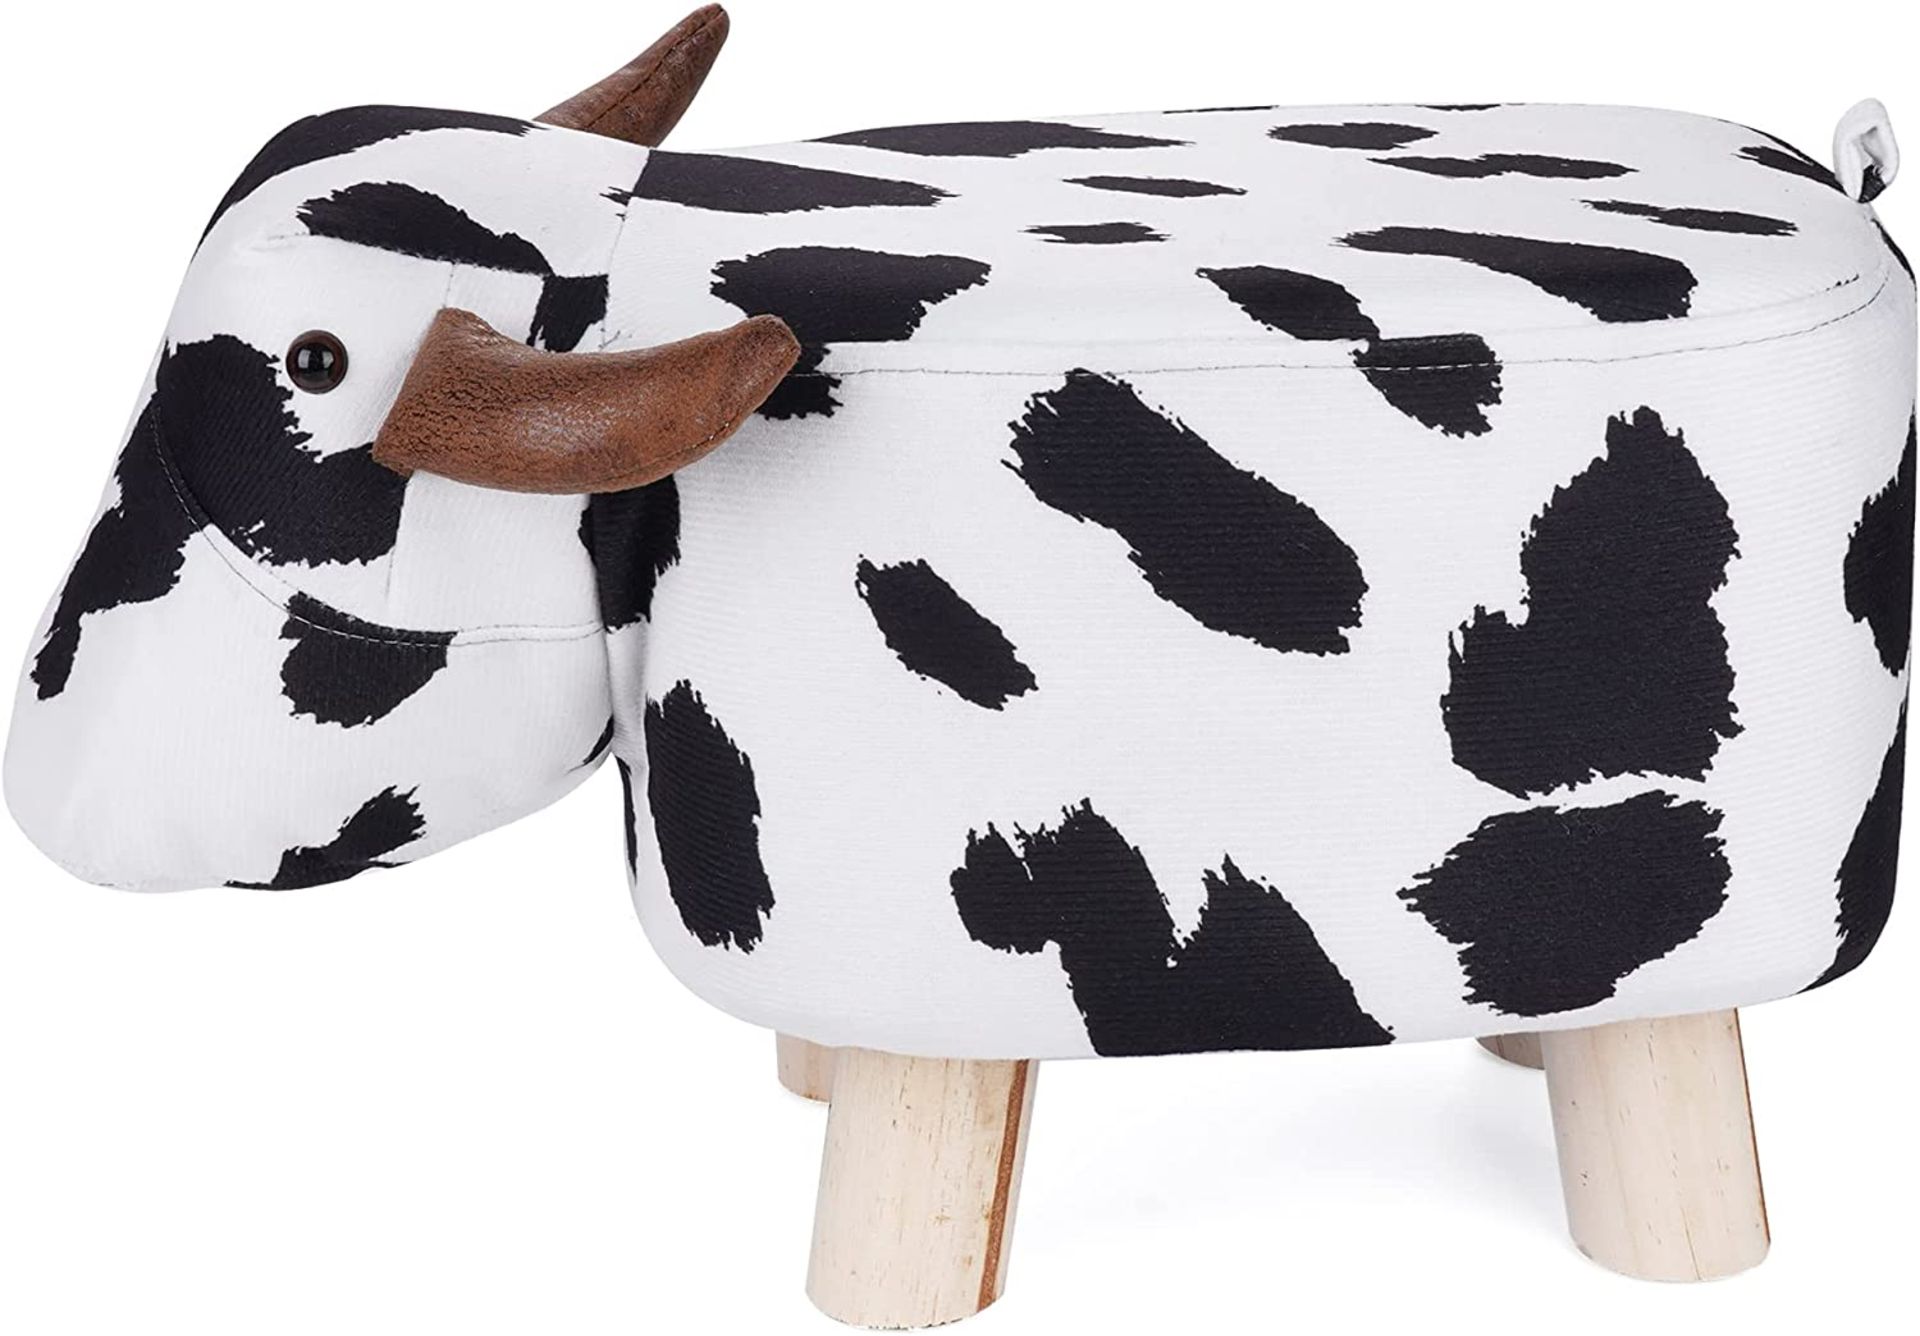 RRP £25.99 Avos-Deals-Global - Black & White Cow Shaped Footstool, Upholstered Ottoman Footrest